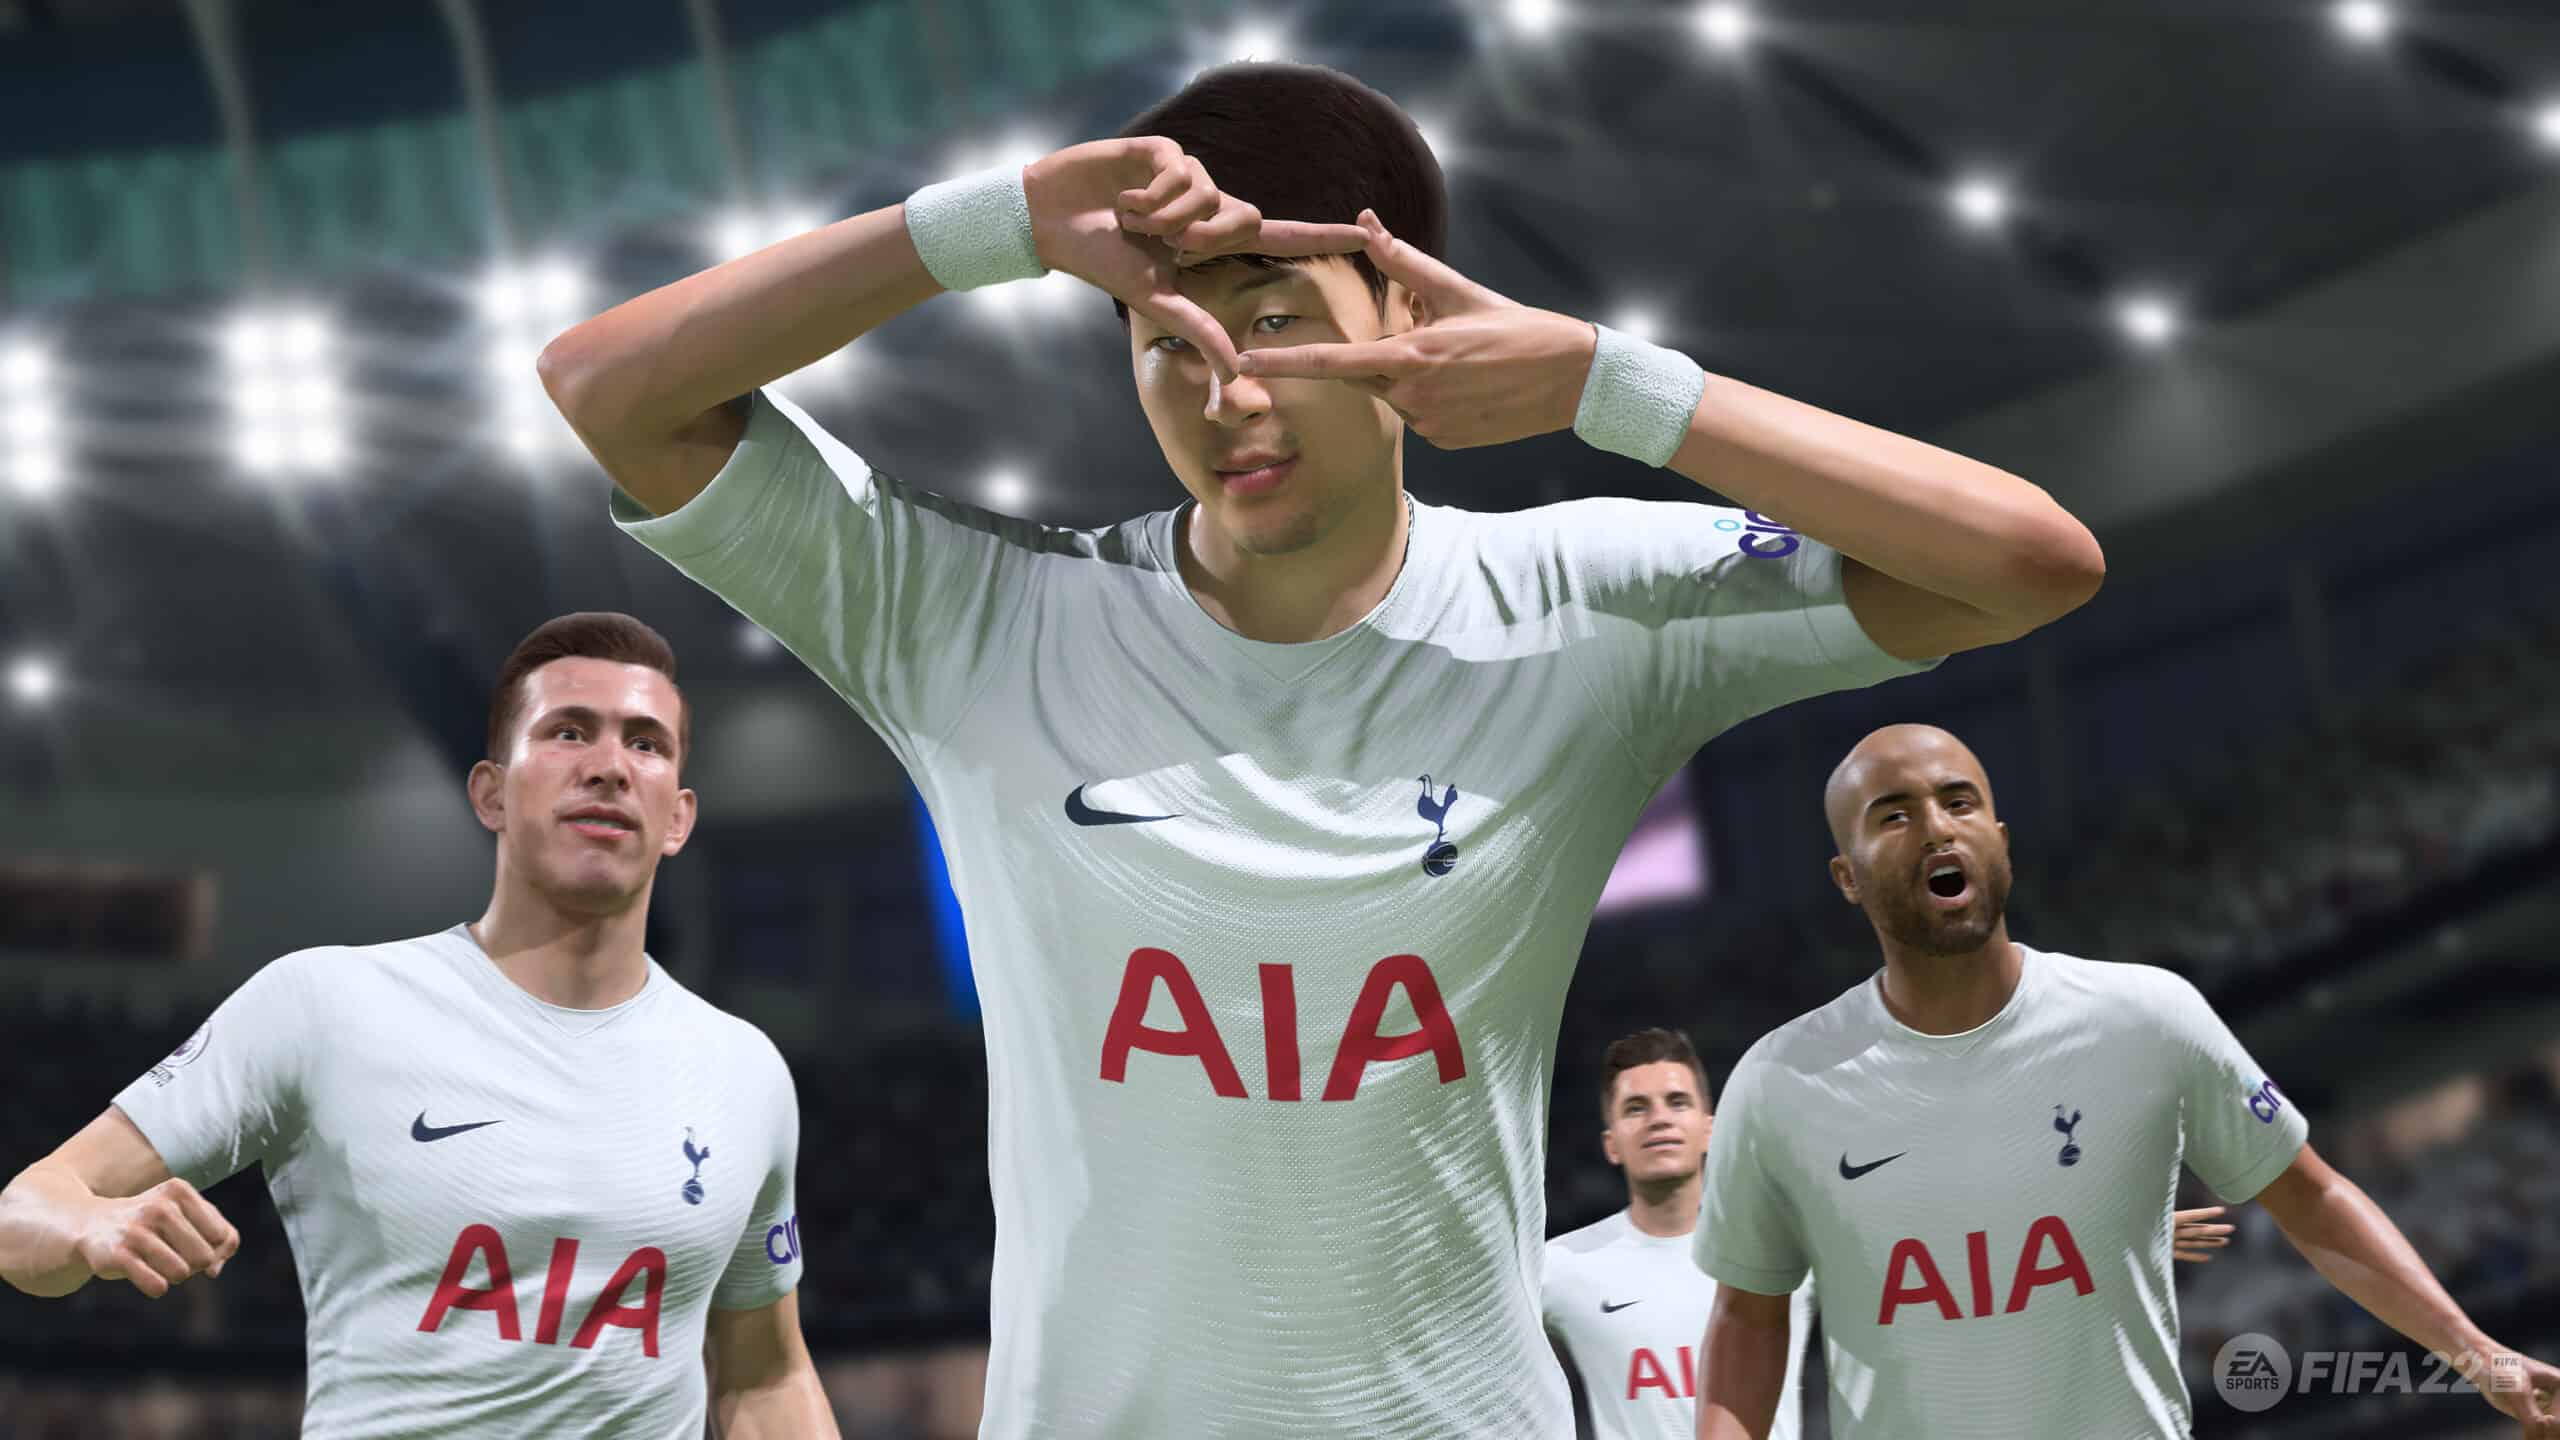 FIFA 22 Crossplay between PC and Xbox One